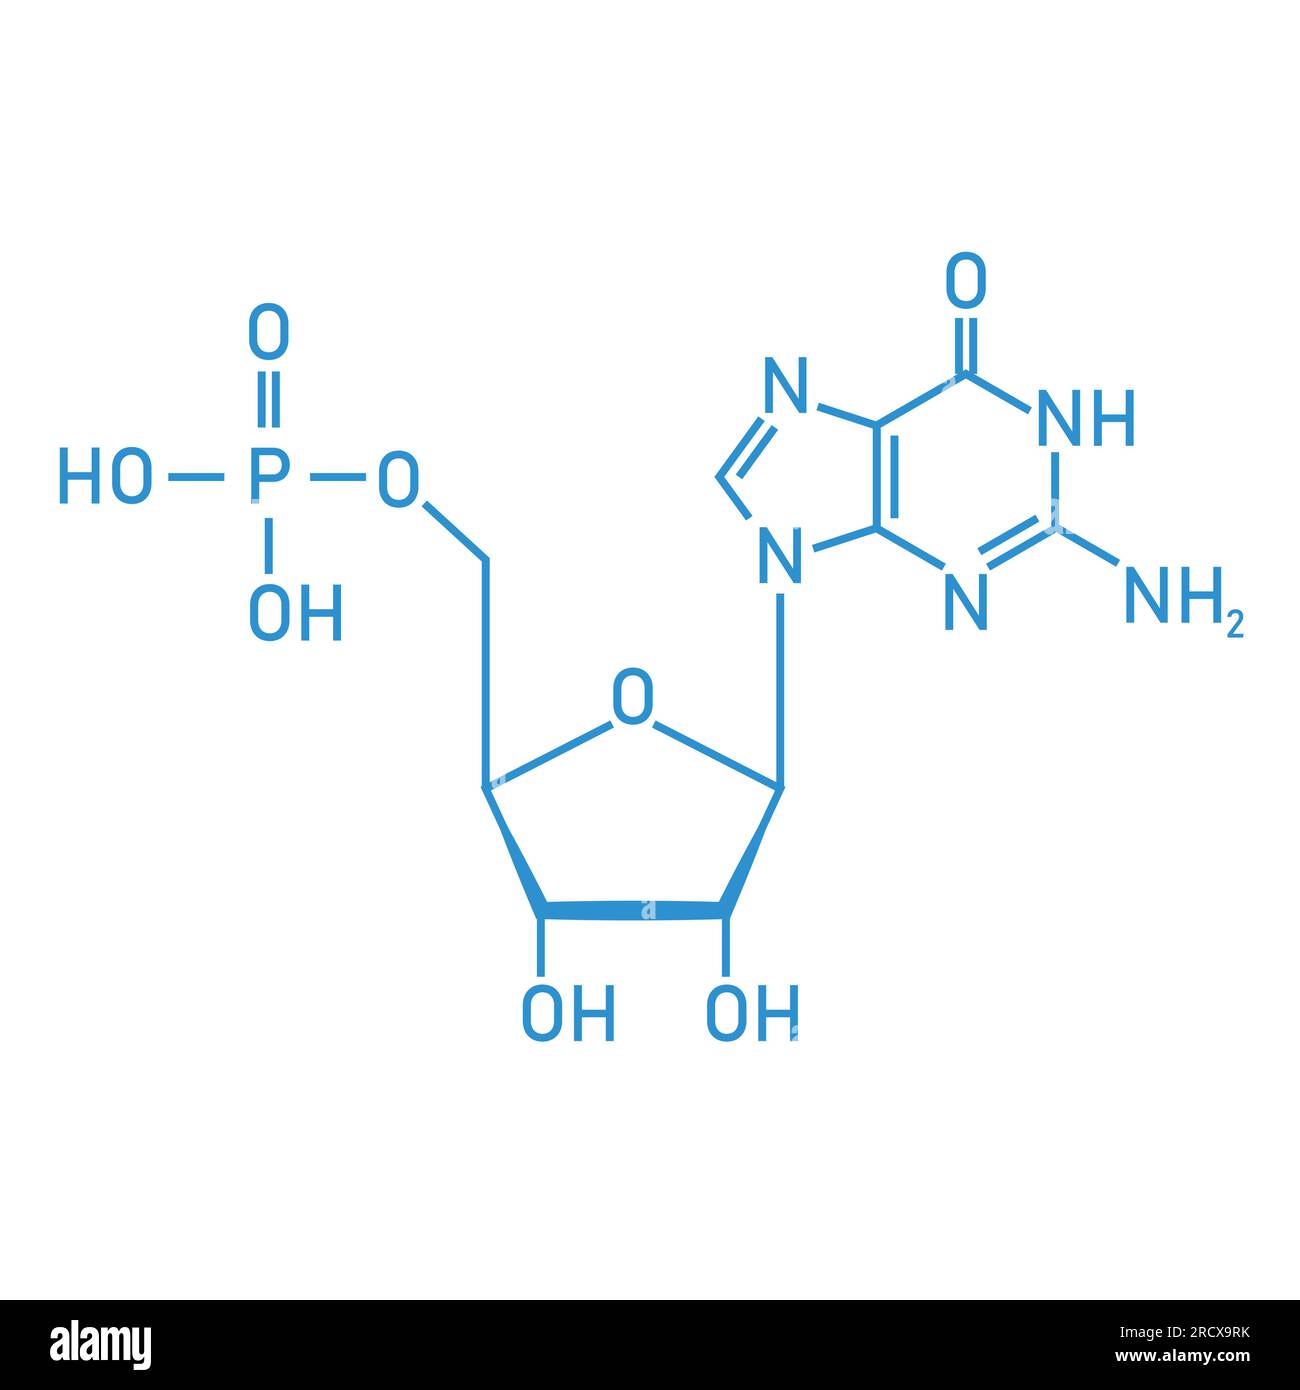 Chemical structure of DNA nucleotide. Three parts of a nucleotide. Phosphate group, pentose sugar and nitrogenous base. Nucleic acids. Stock Vector